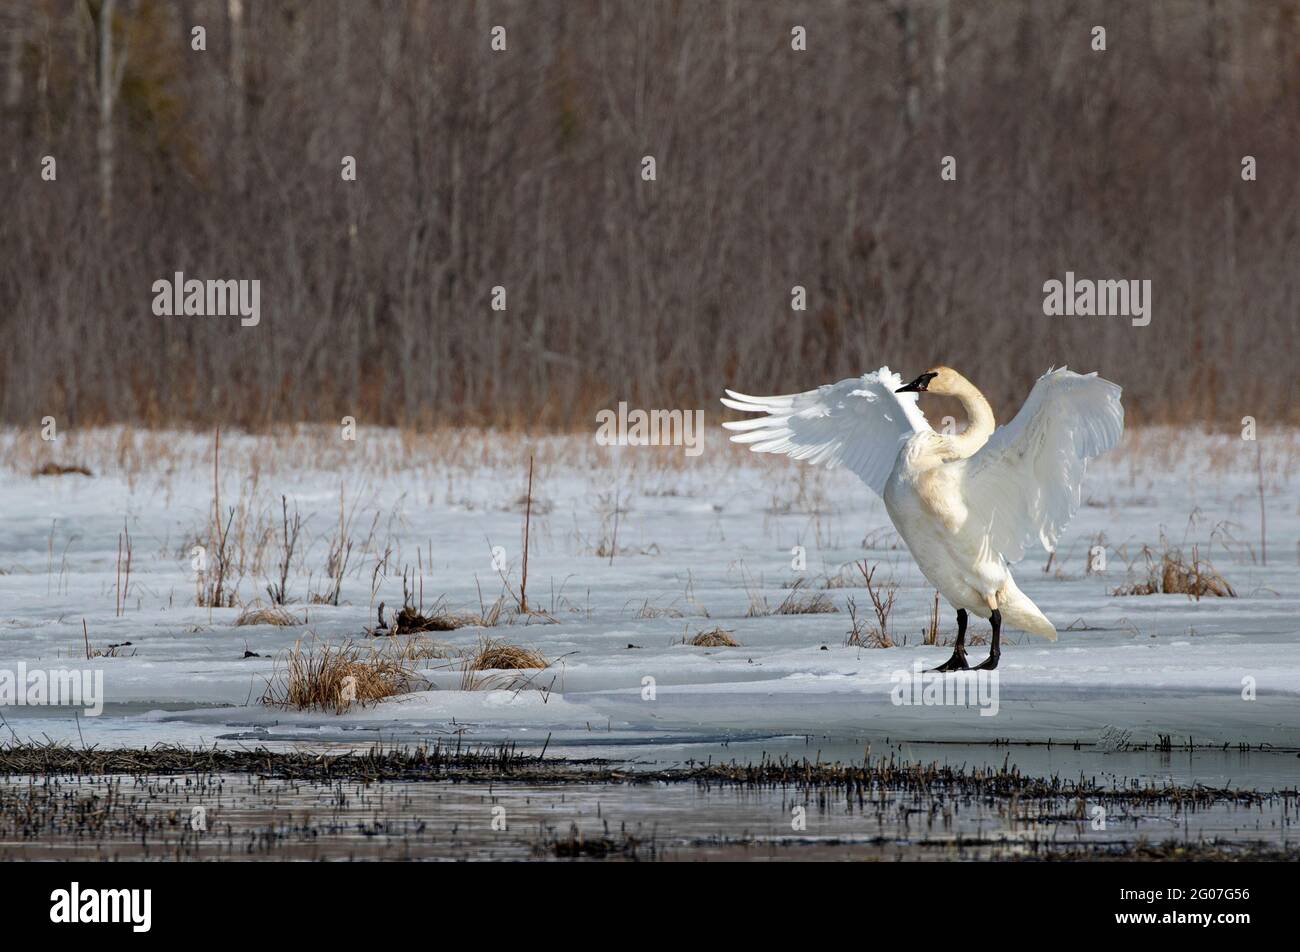 A trumpeter swan, newly arrived from points south, dries its wings while standing on an ice one April afternoon in Alaska's Matanuska Valley. Stock Photo